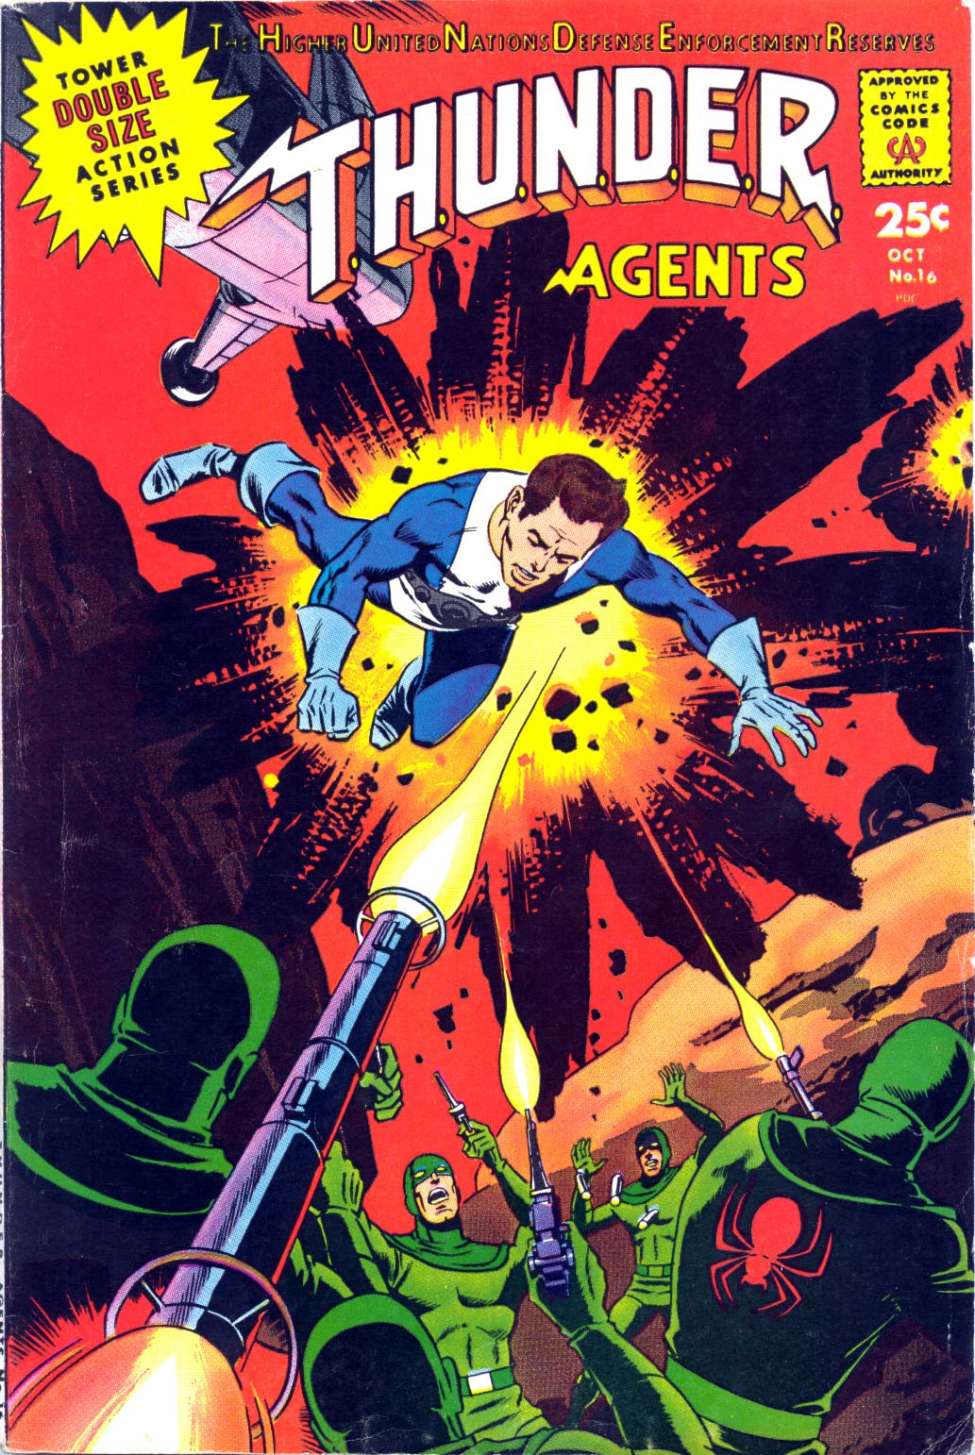 Book Cover For T.H.U.N.D.E.R. Agents 16